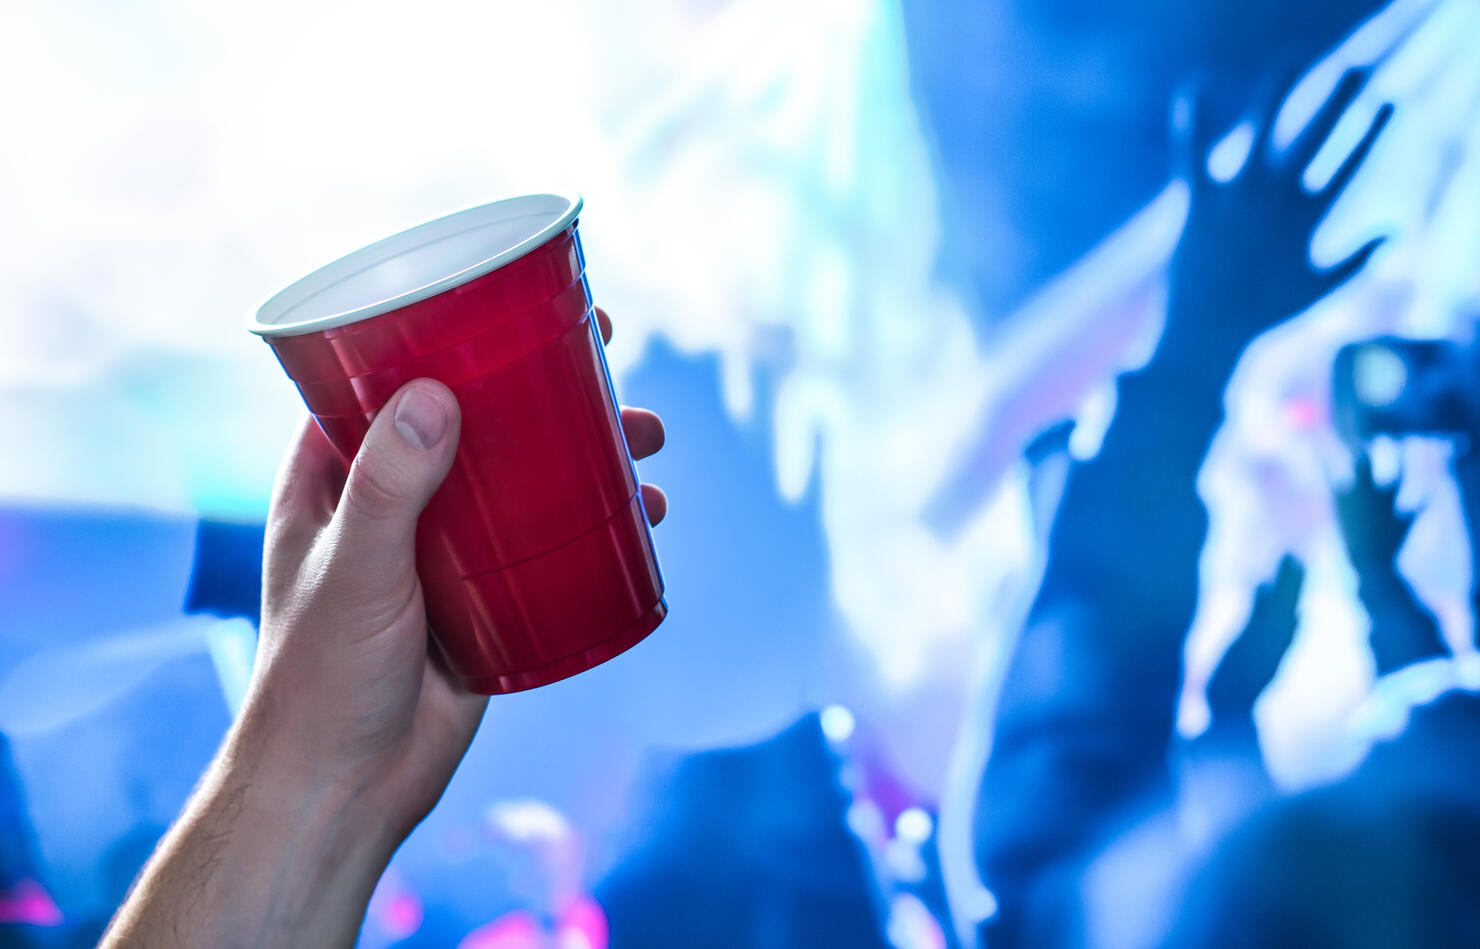 Red party cup in hand in night club, bar or college student event. Plastic beer mug. People having fun in blue nightclub disco lights on dance floor